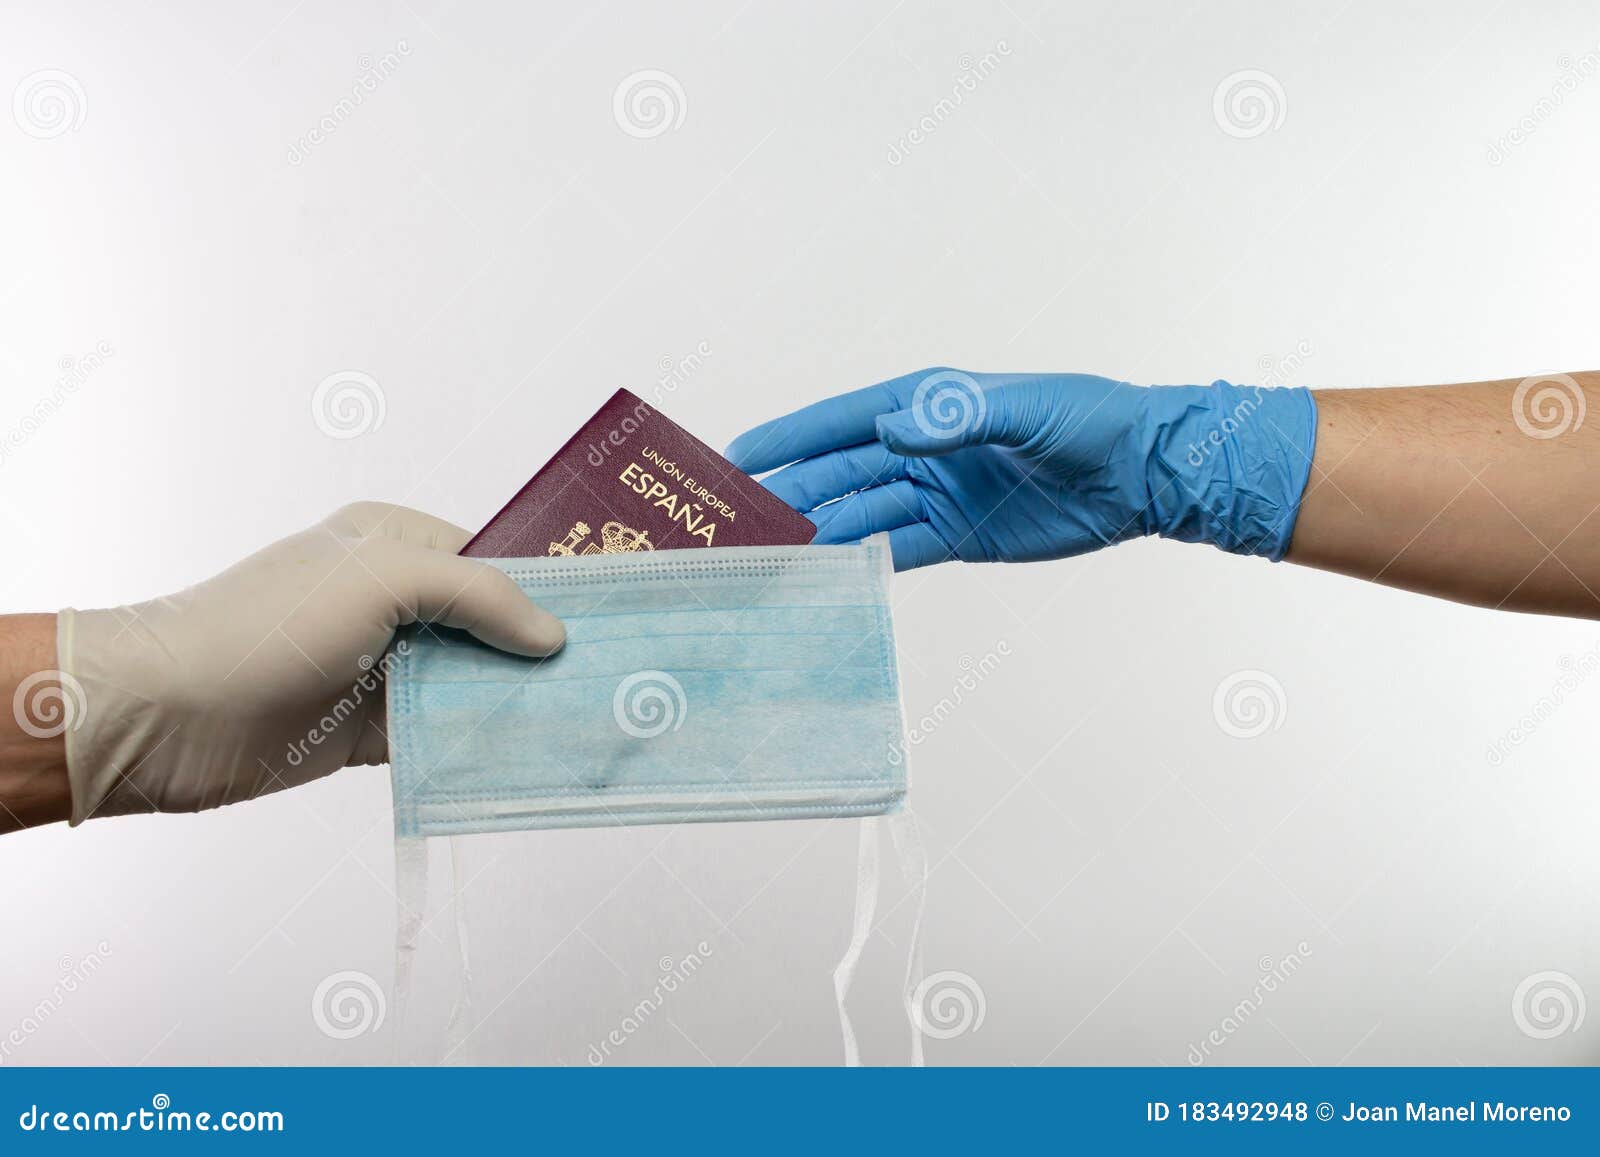 Hand With Protective Gloves Giving A Spanish Passport With